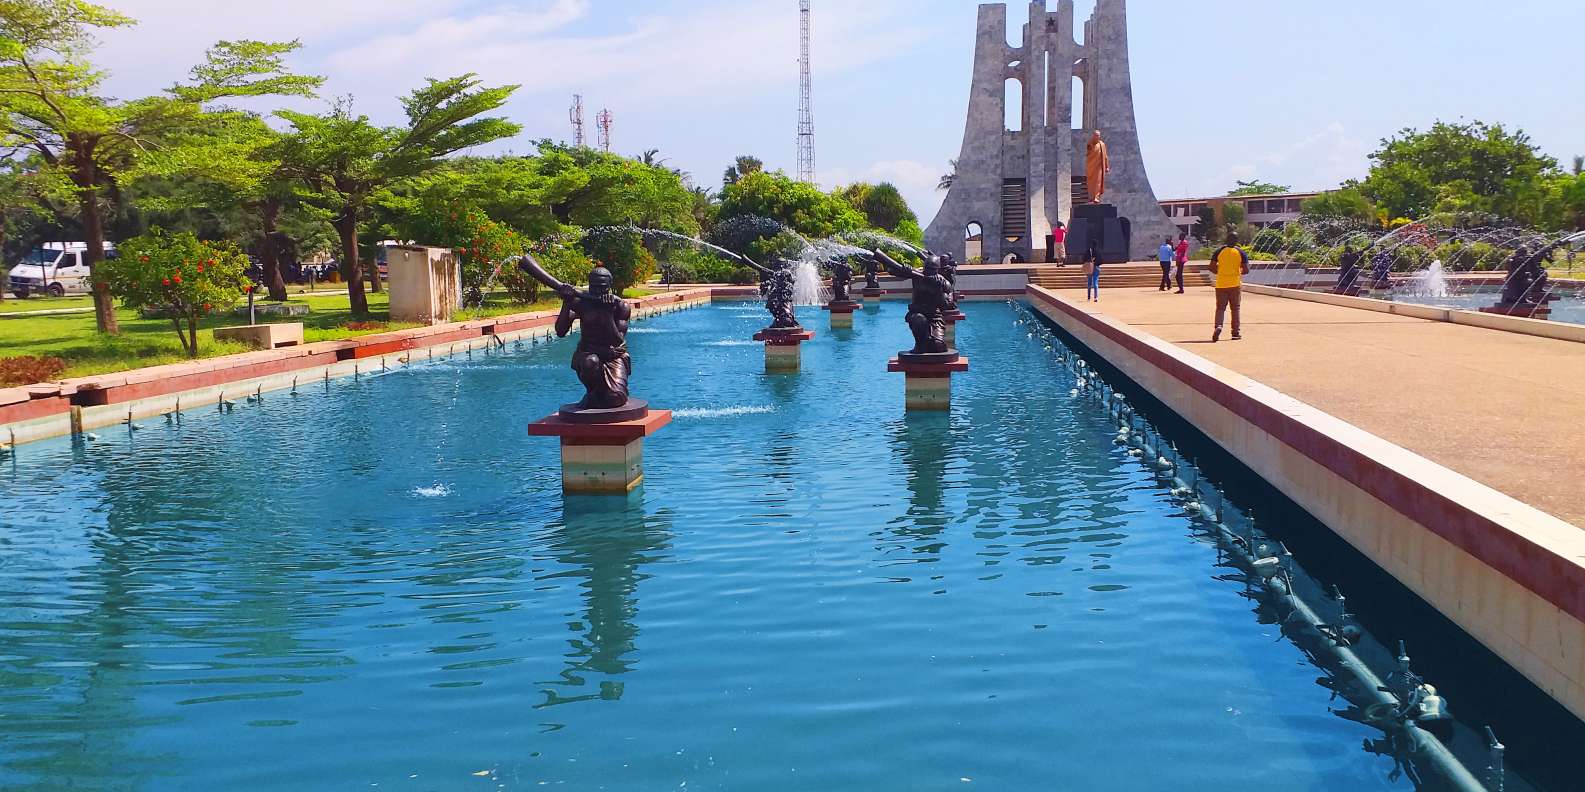 What to do in Accra